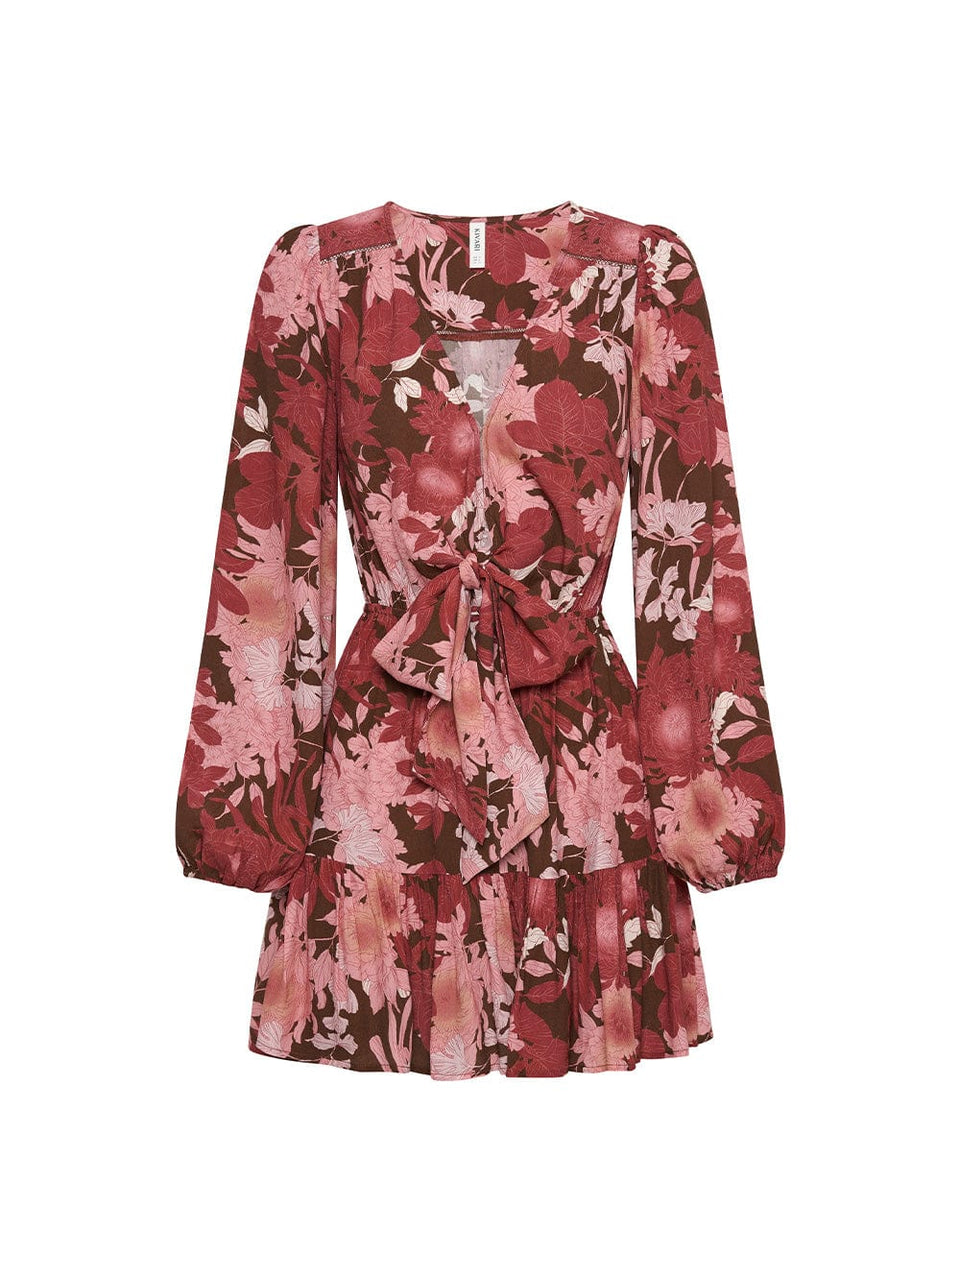 Ghost image of the KIVARI Hacienda Tie Front Mini Dress: A red, pink and brown floral dress crafted from sustainable LENZING Viscose Crepe featuring full-length sleeves, a tiered skirt and a soft ribboned tie.